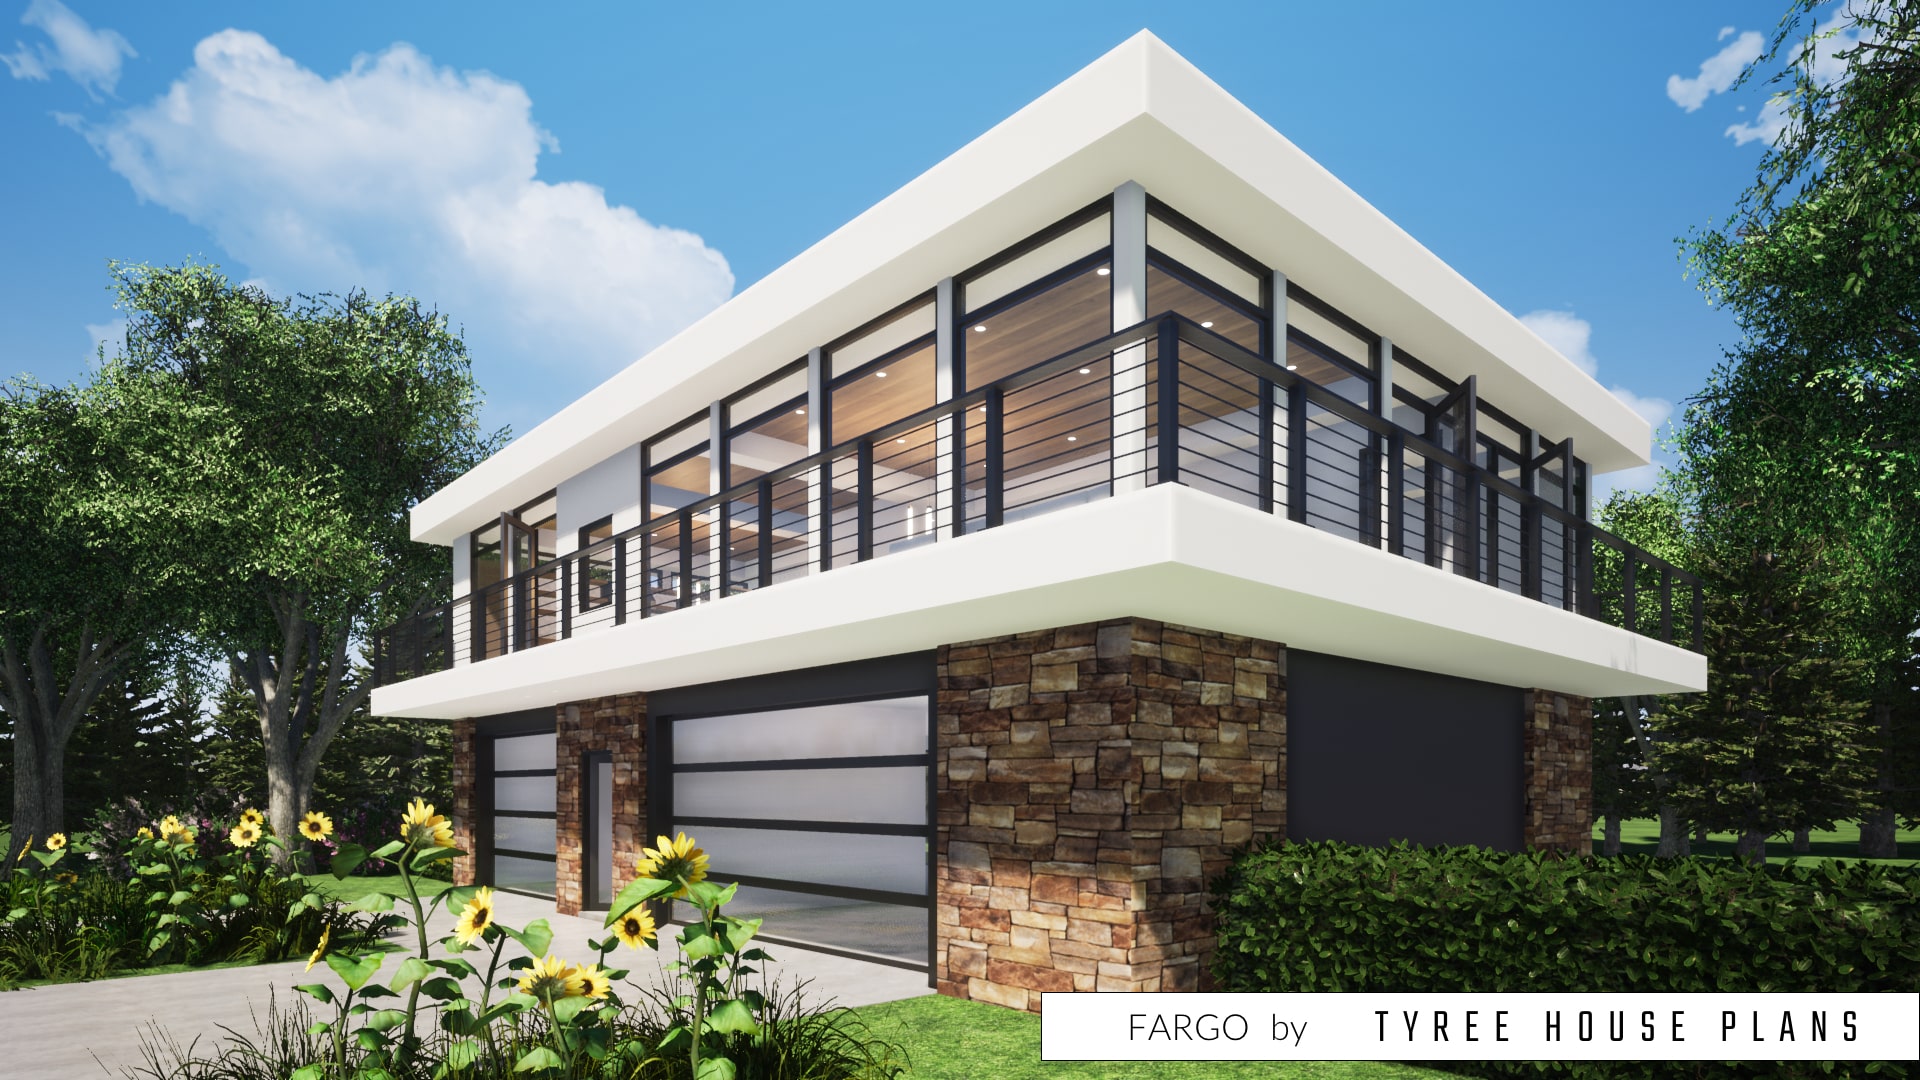 Fargo House Plan by Tyree House Plans